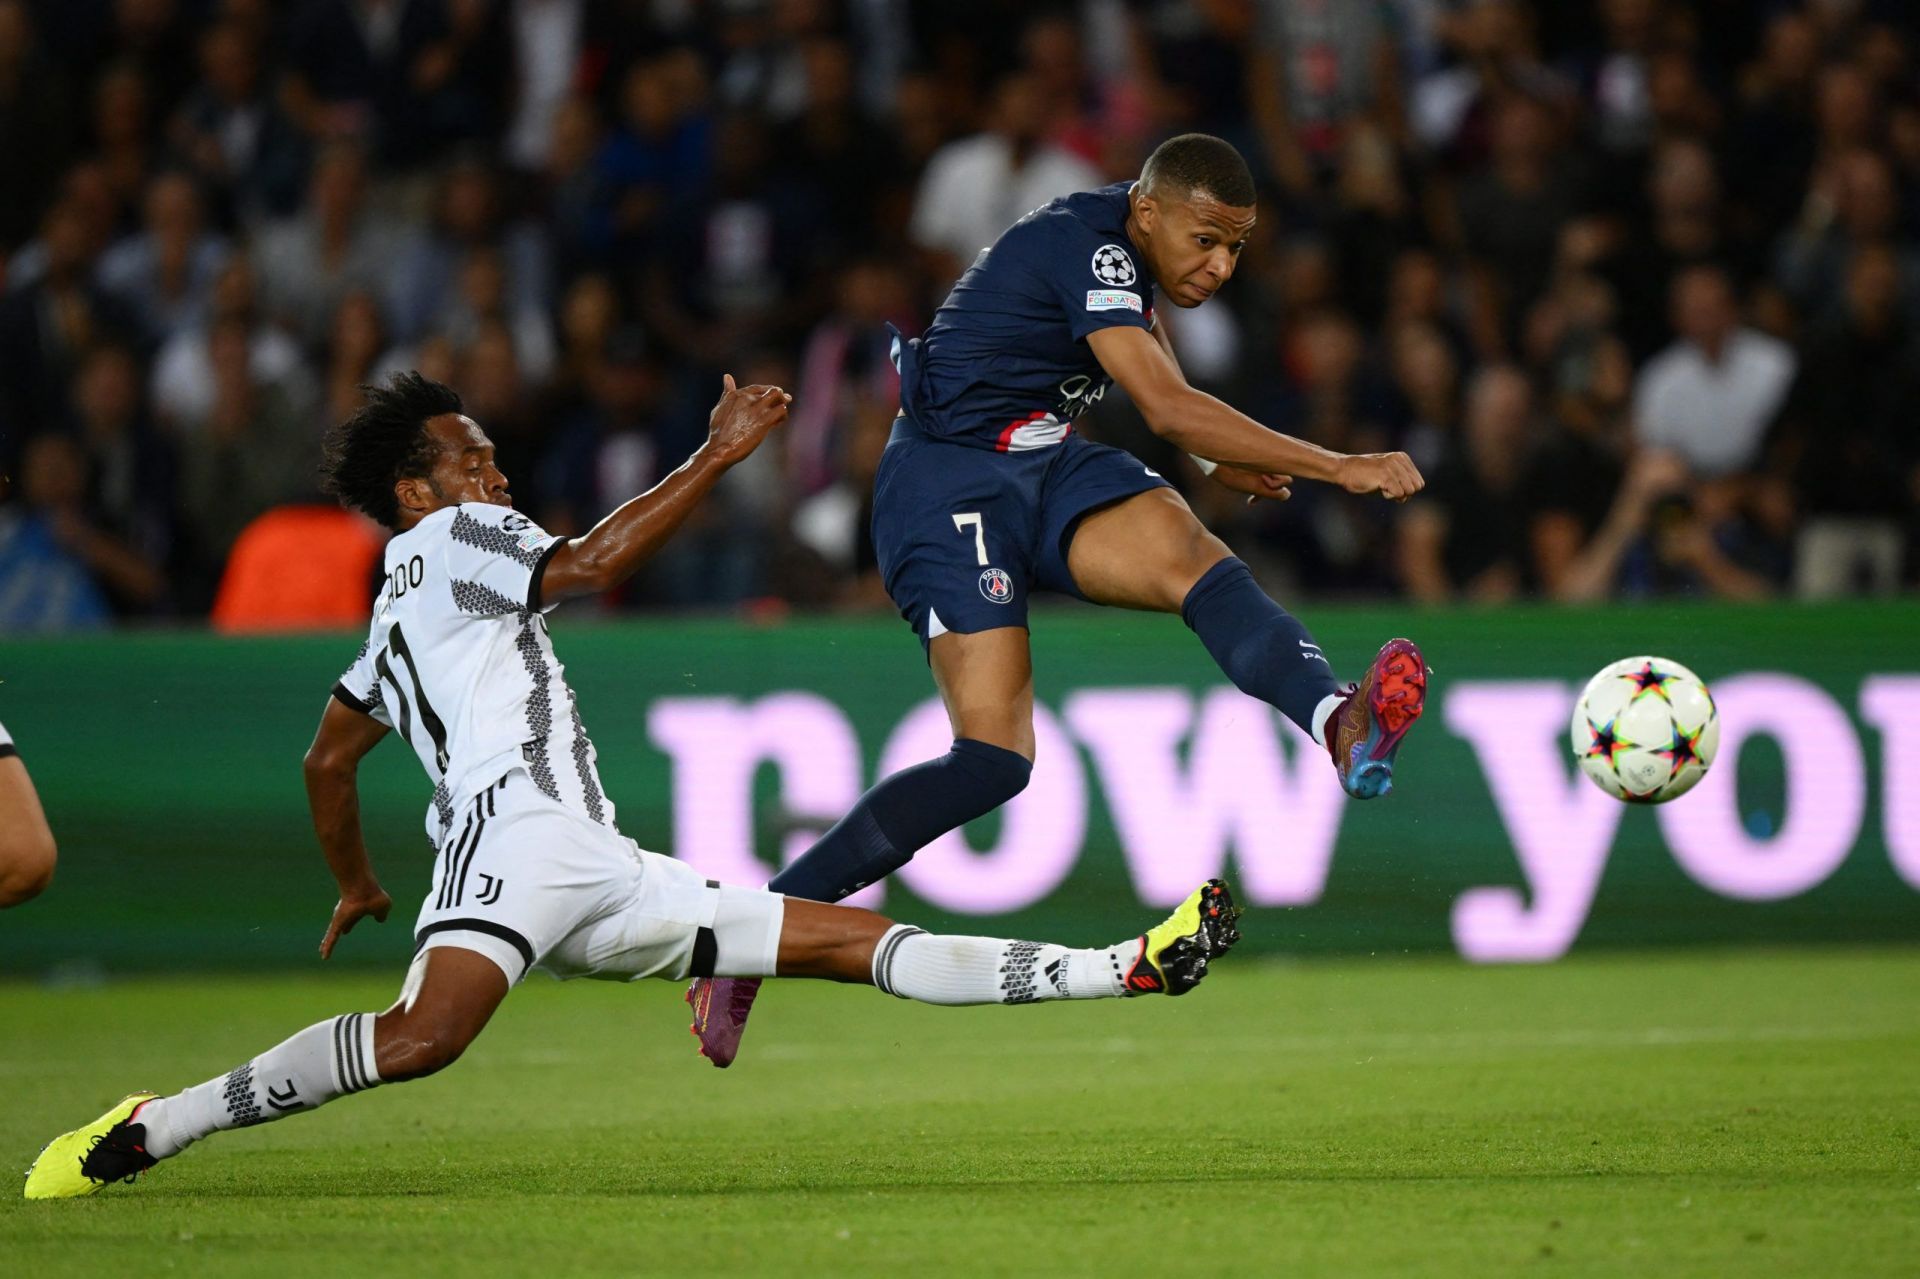 Kylian Mbappe fired PSG in front with a couple of excellent strikes in the first half.